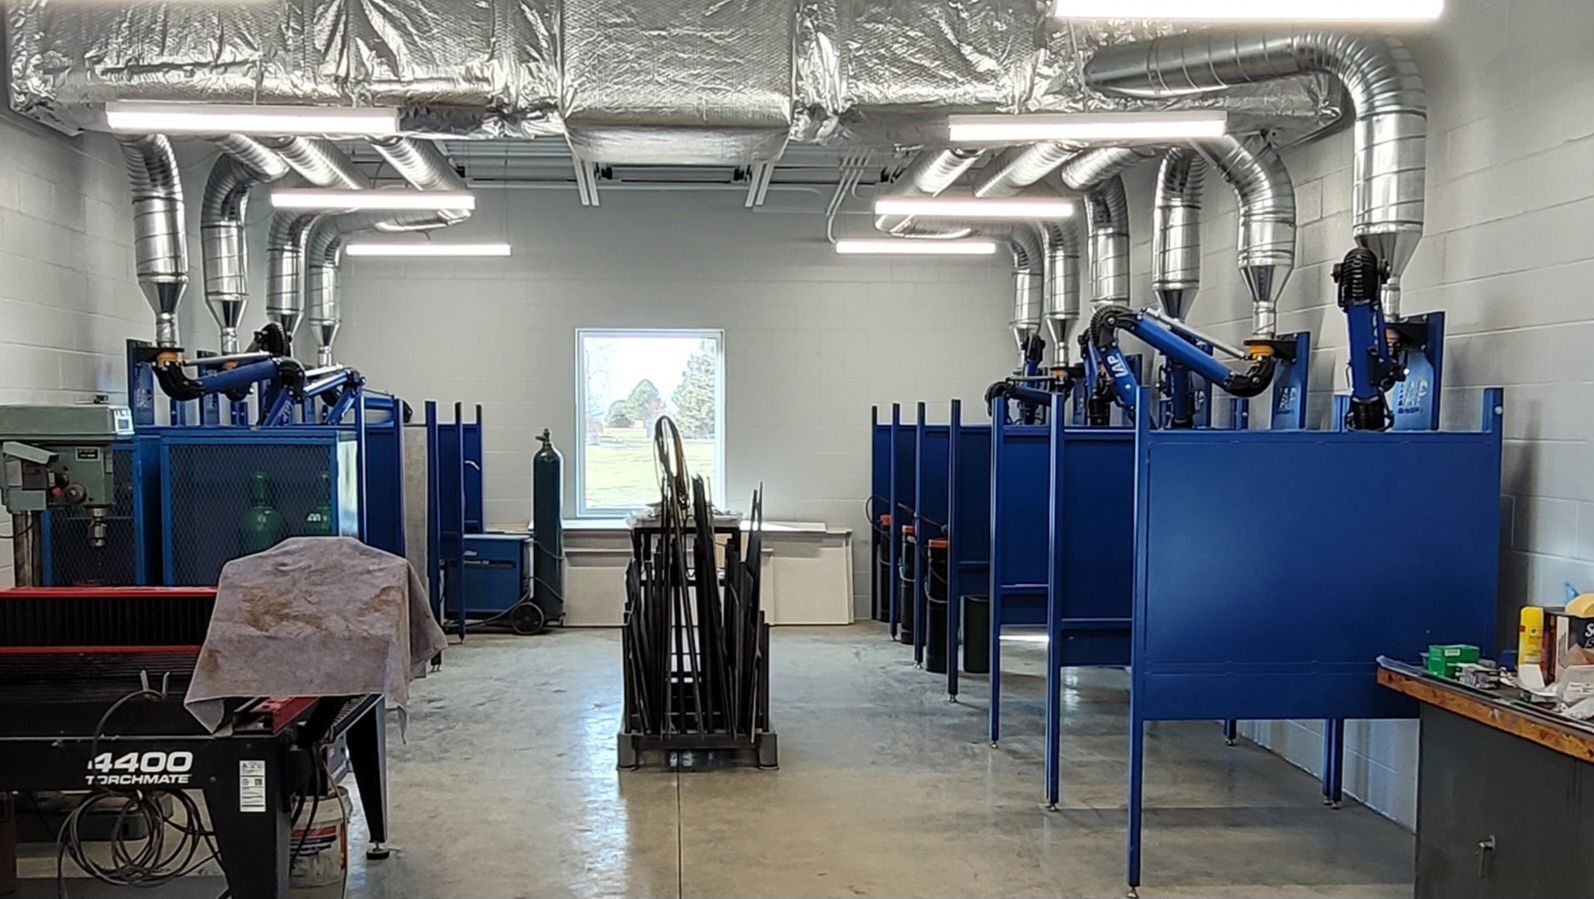 Welding booth for high schools and trade schools